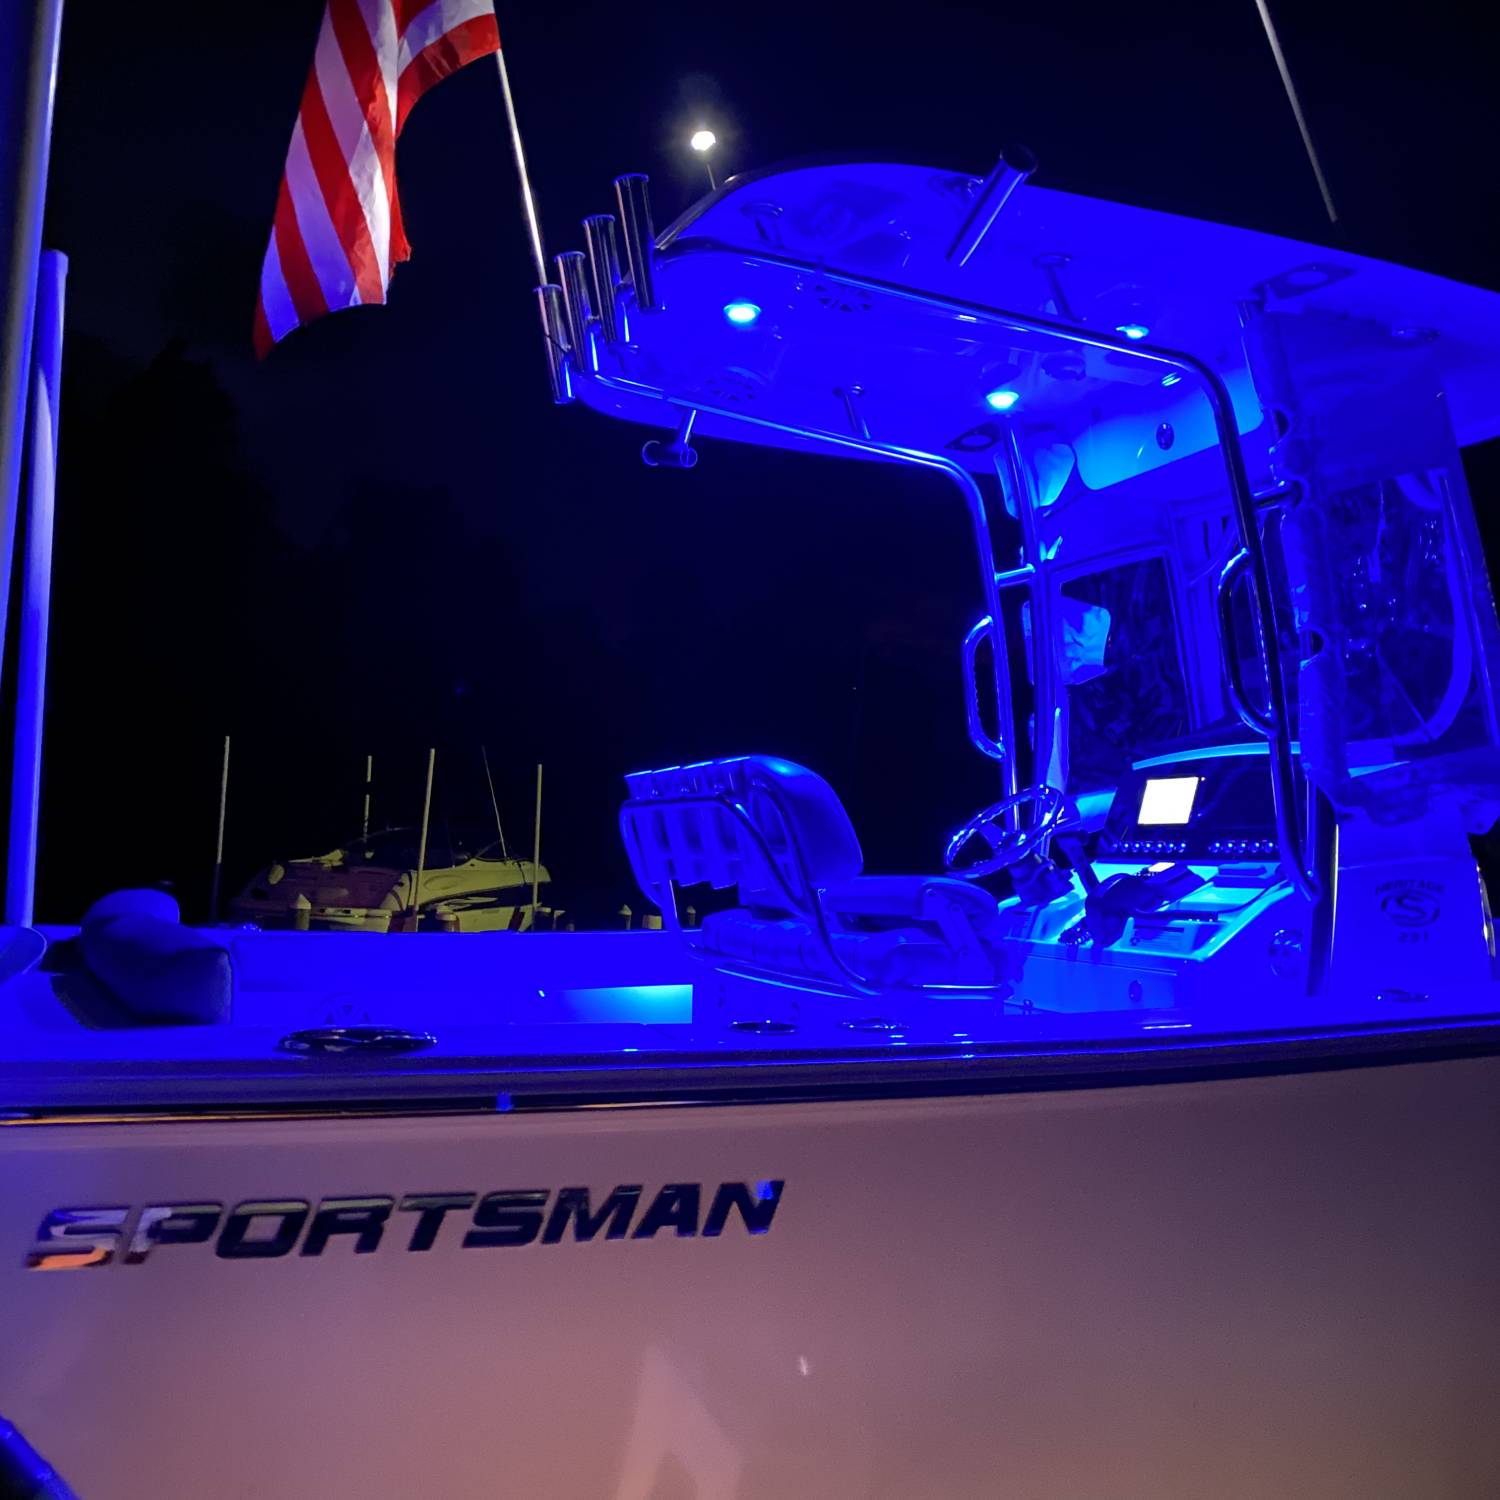 Title: Chillin 😎 - On board their Sportsman Heritage 231 Center Console - Location: Solomon Island. Participating in the Photo Contest #SportsmanNovember2021